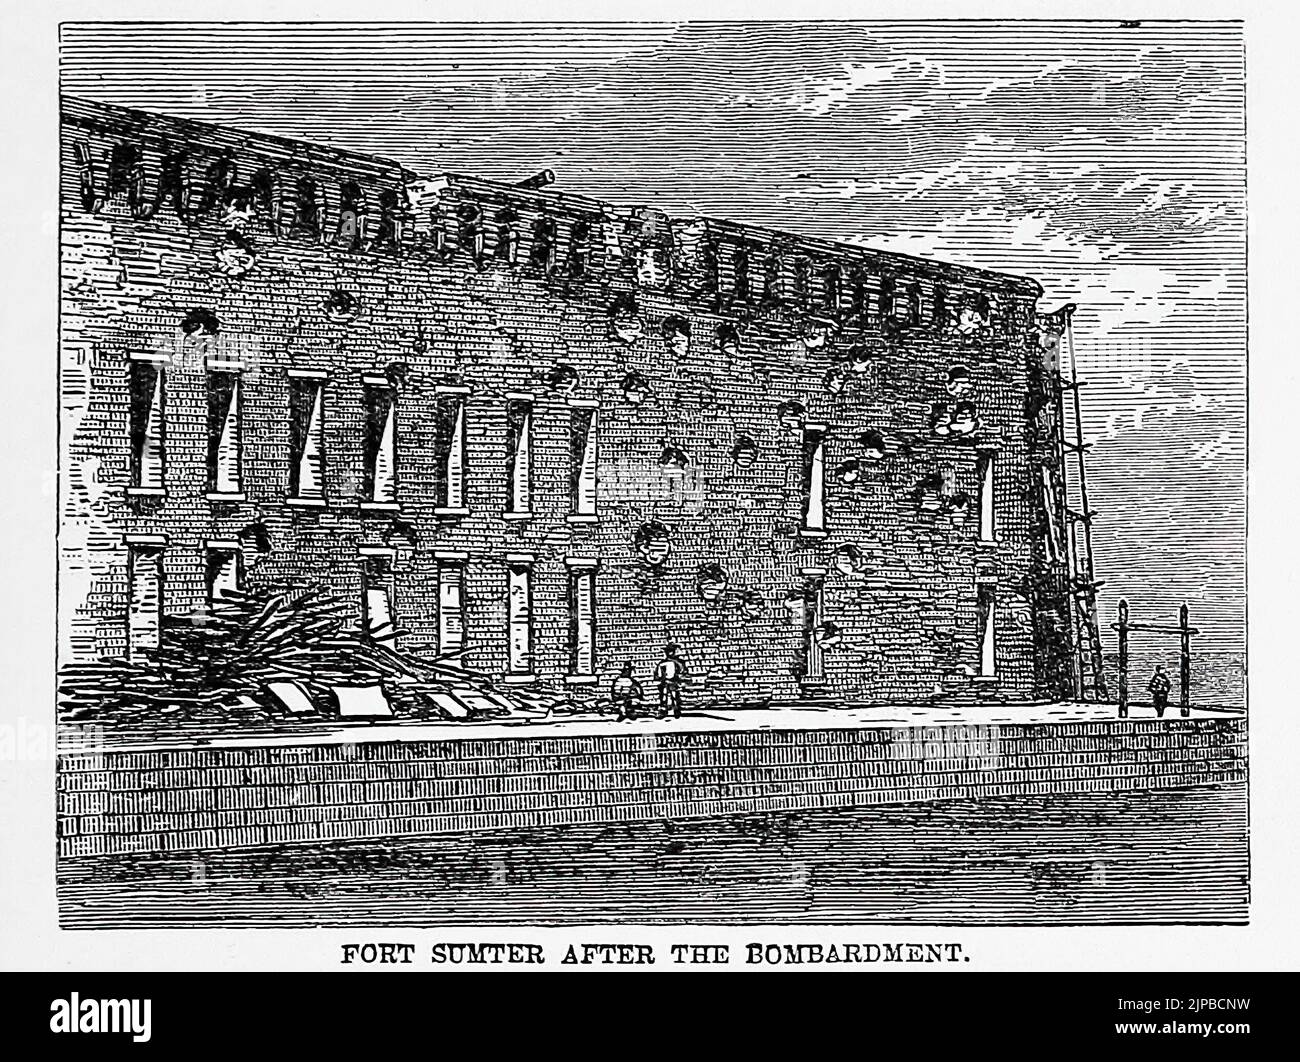 Fort Sumter After The Bombardment. Battle of Fort Sumter, South Carolina, April 1861. 19th century American Civil War illustration by George B. Herbert Stock Photo